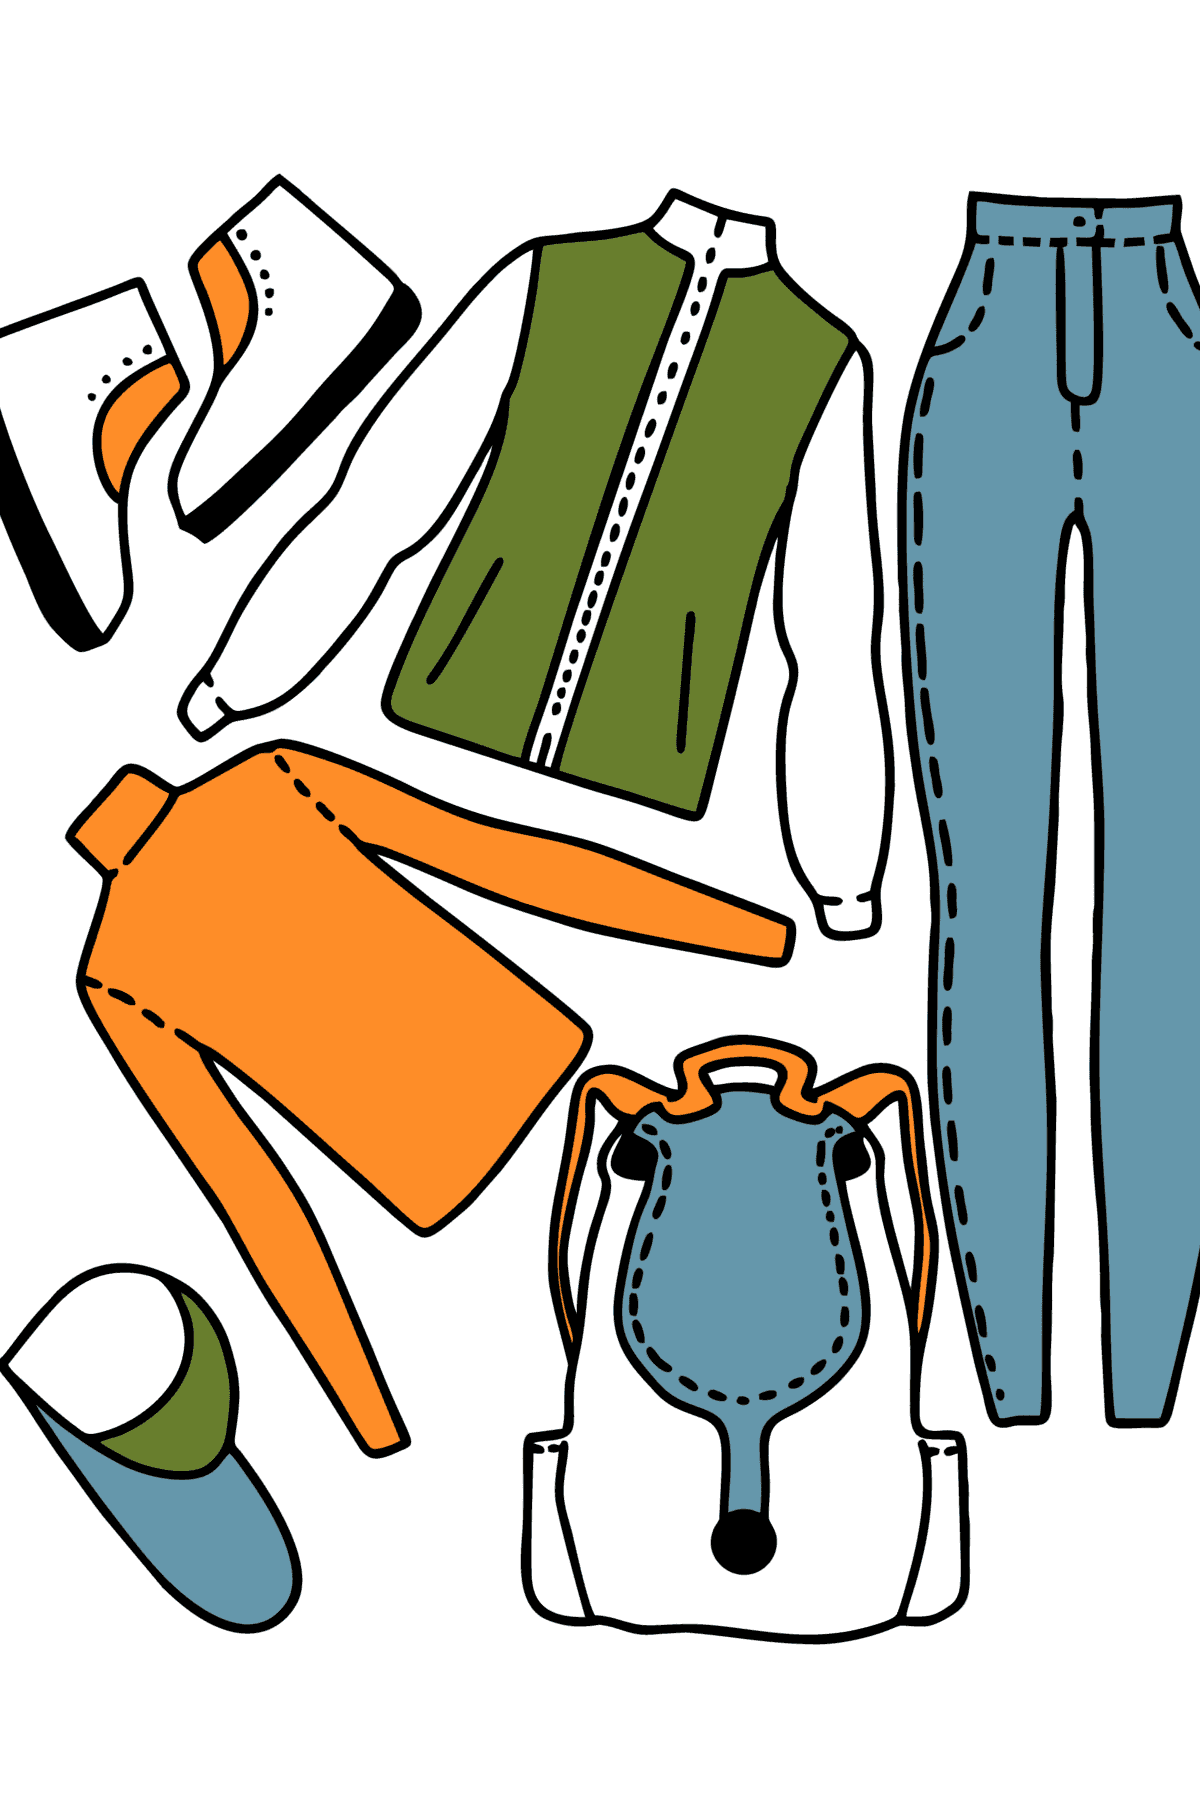 Spring Clothes coloring page - Coloring Pages for Kids